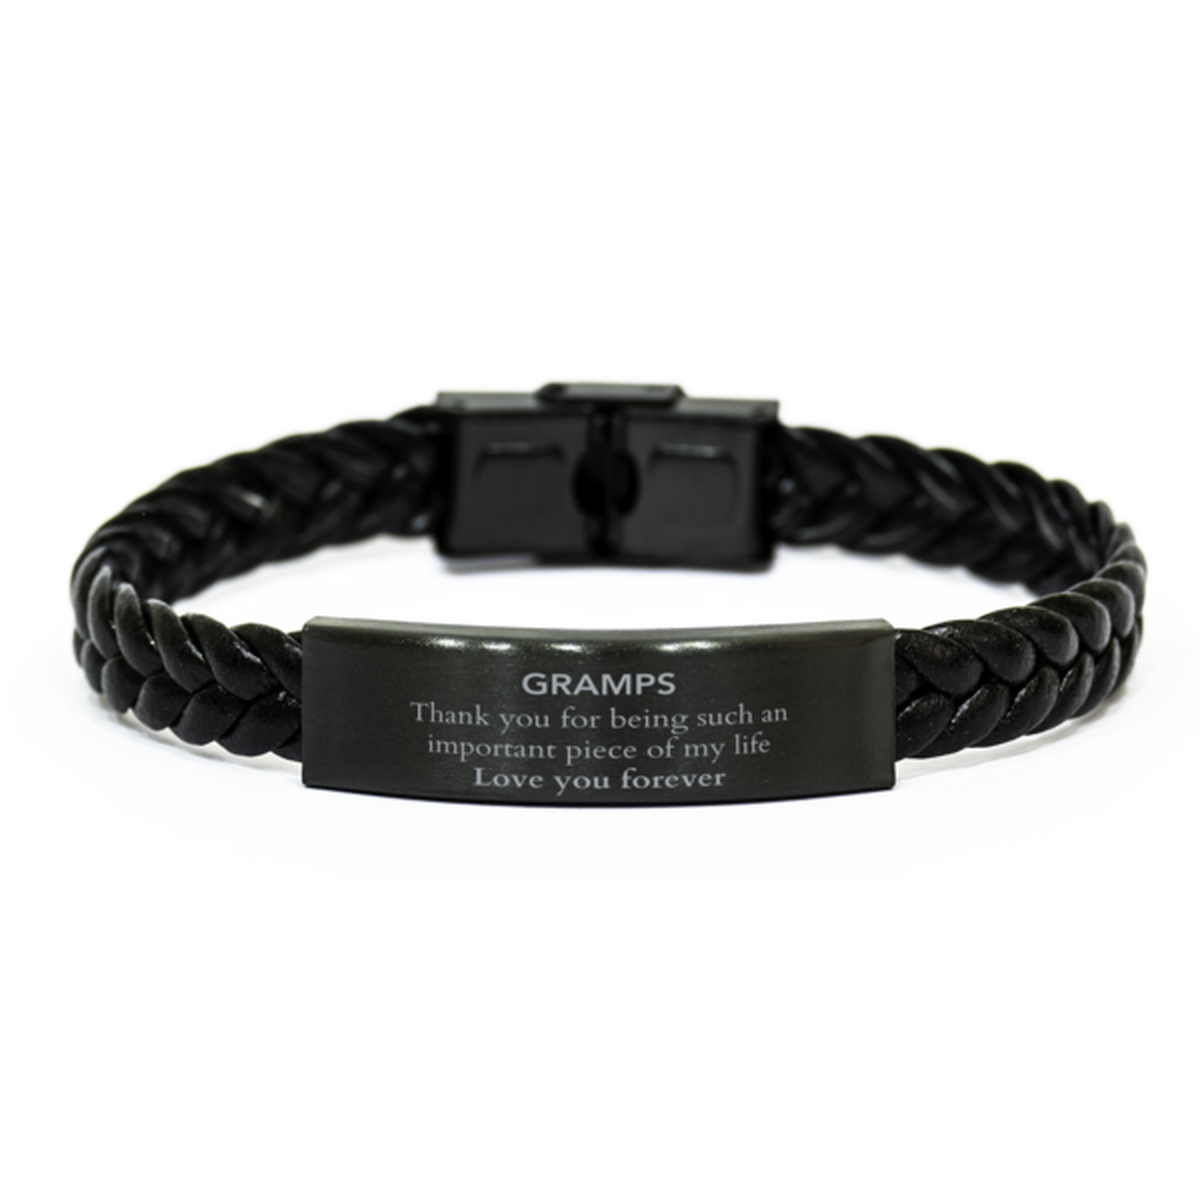 Appropriate Gramps Braided Leather Bracelet Epic Birthday Gifts for Gramps Thank you for being such an important piece of my life Gramps Christmas Mothers Fathers Day